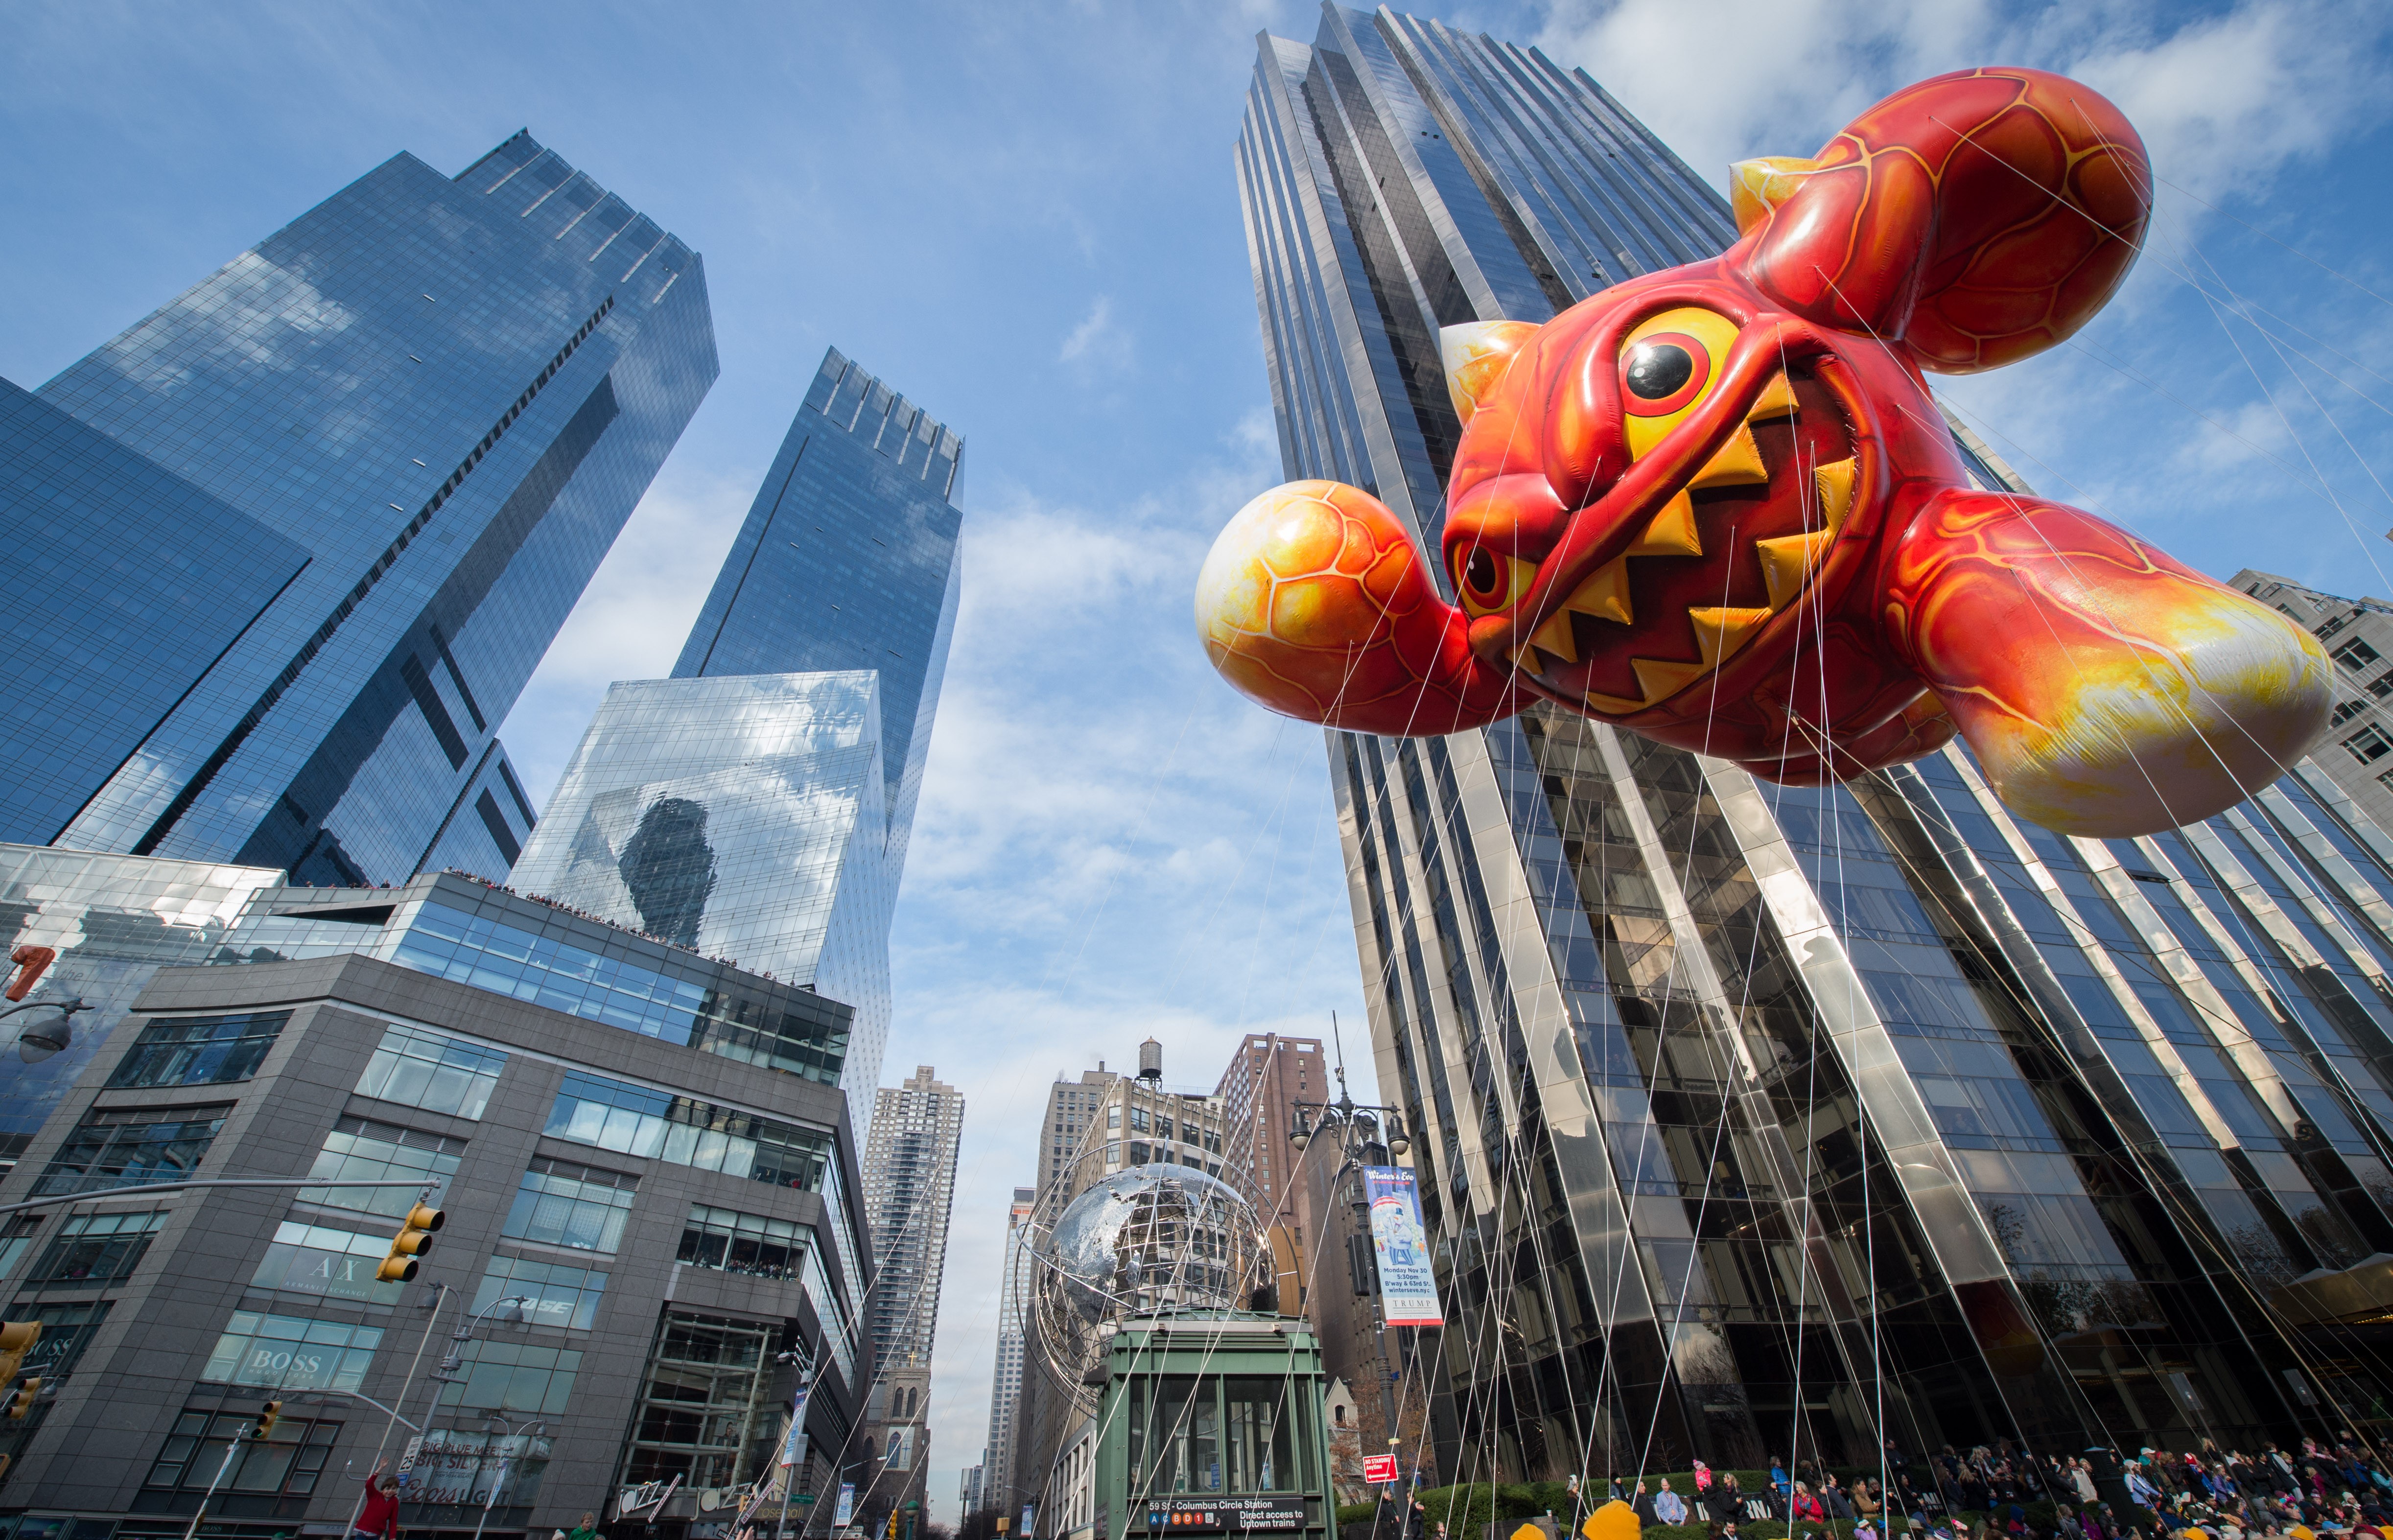 The Macy's Thanksgiving Day Parade moves through Columbus Circle in New York. Deutsche Bank’s new Midtown address will be One Columbus Circle, which is part of the complex at the 80-story, twin-towered Time Warner Center. Photo: AP